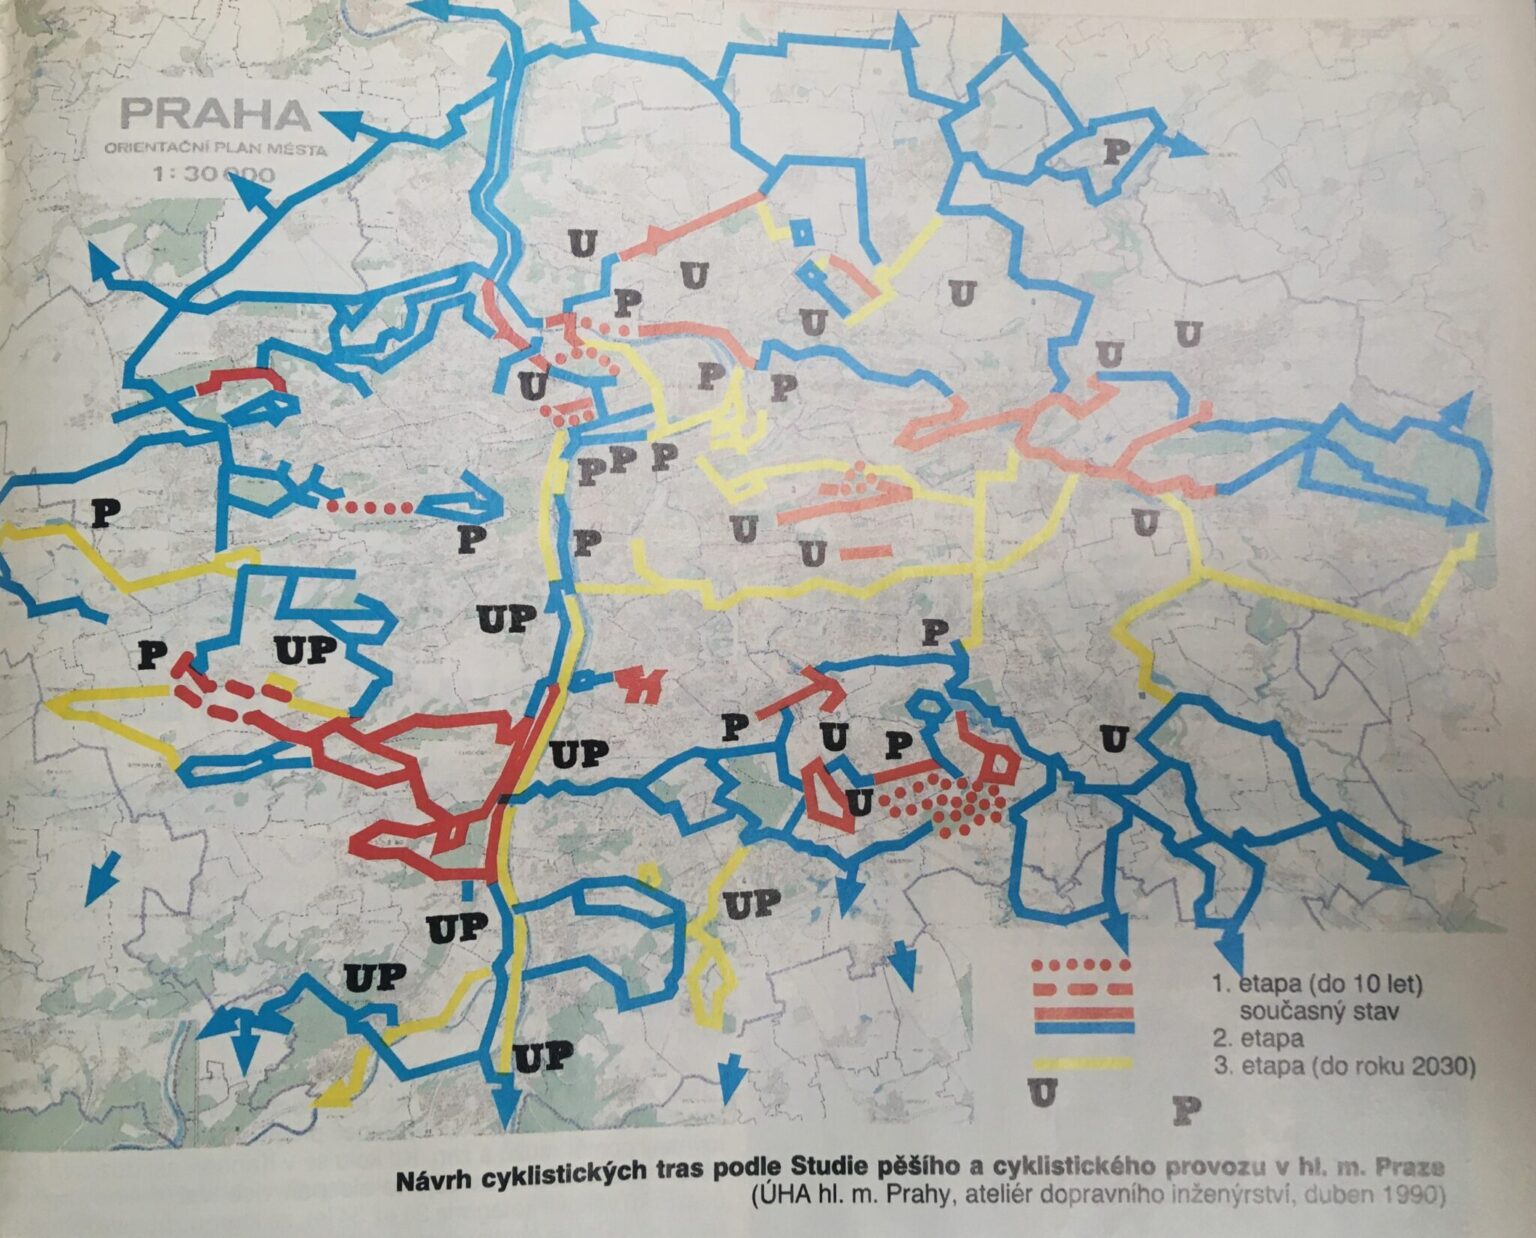 One of the historical plans for the development of cycling routes in Prague from 1990. Zdroj: Technický magazín